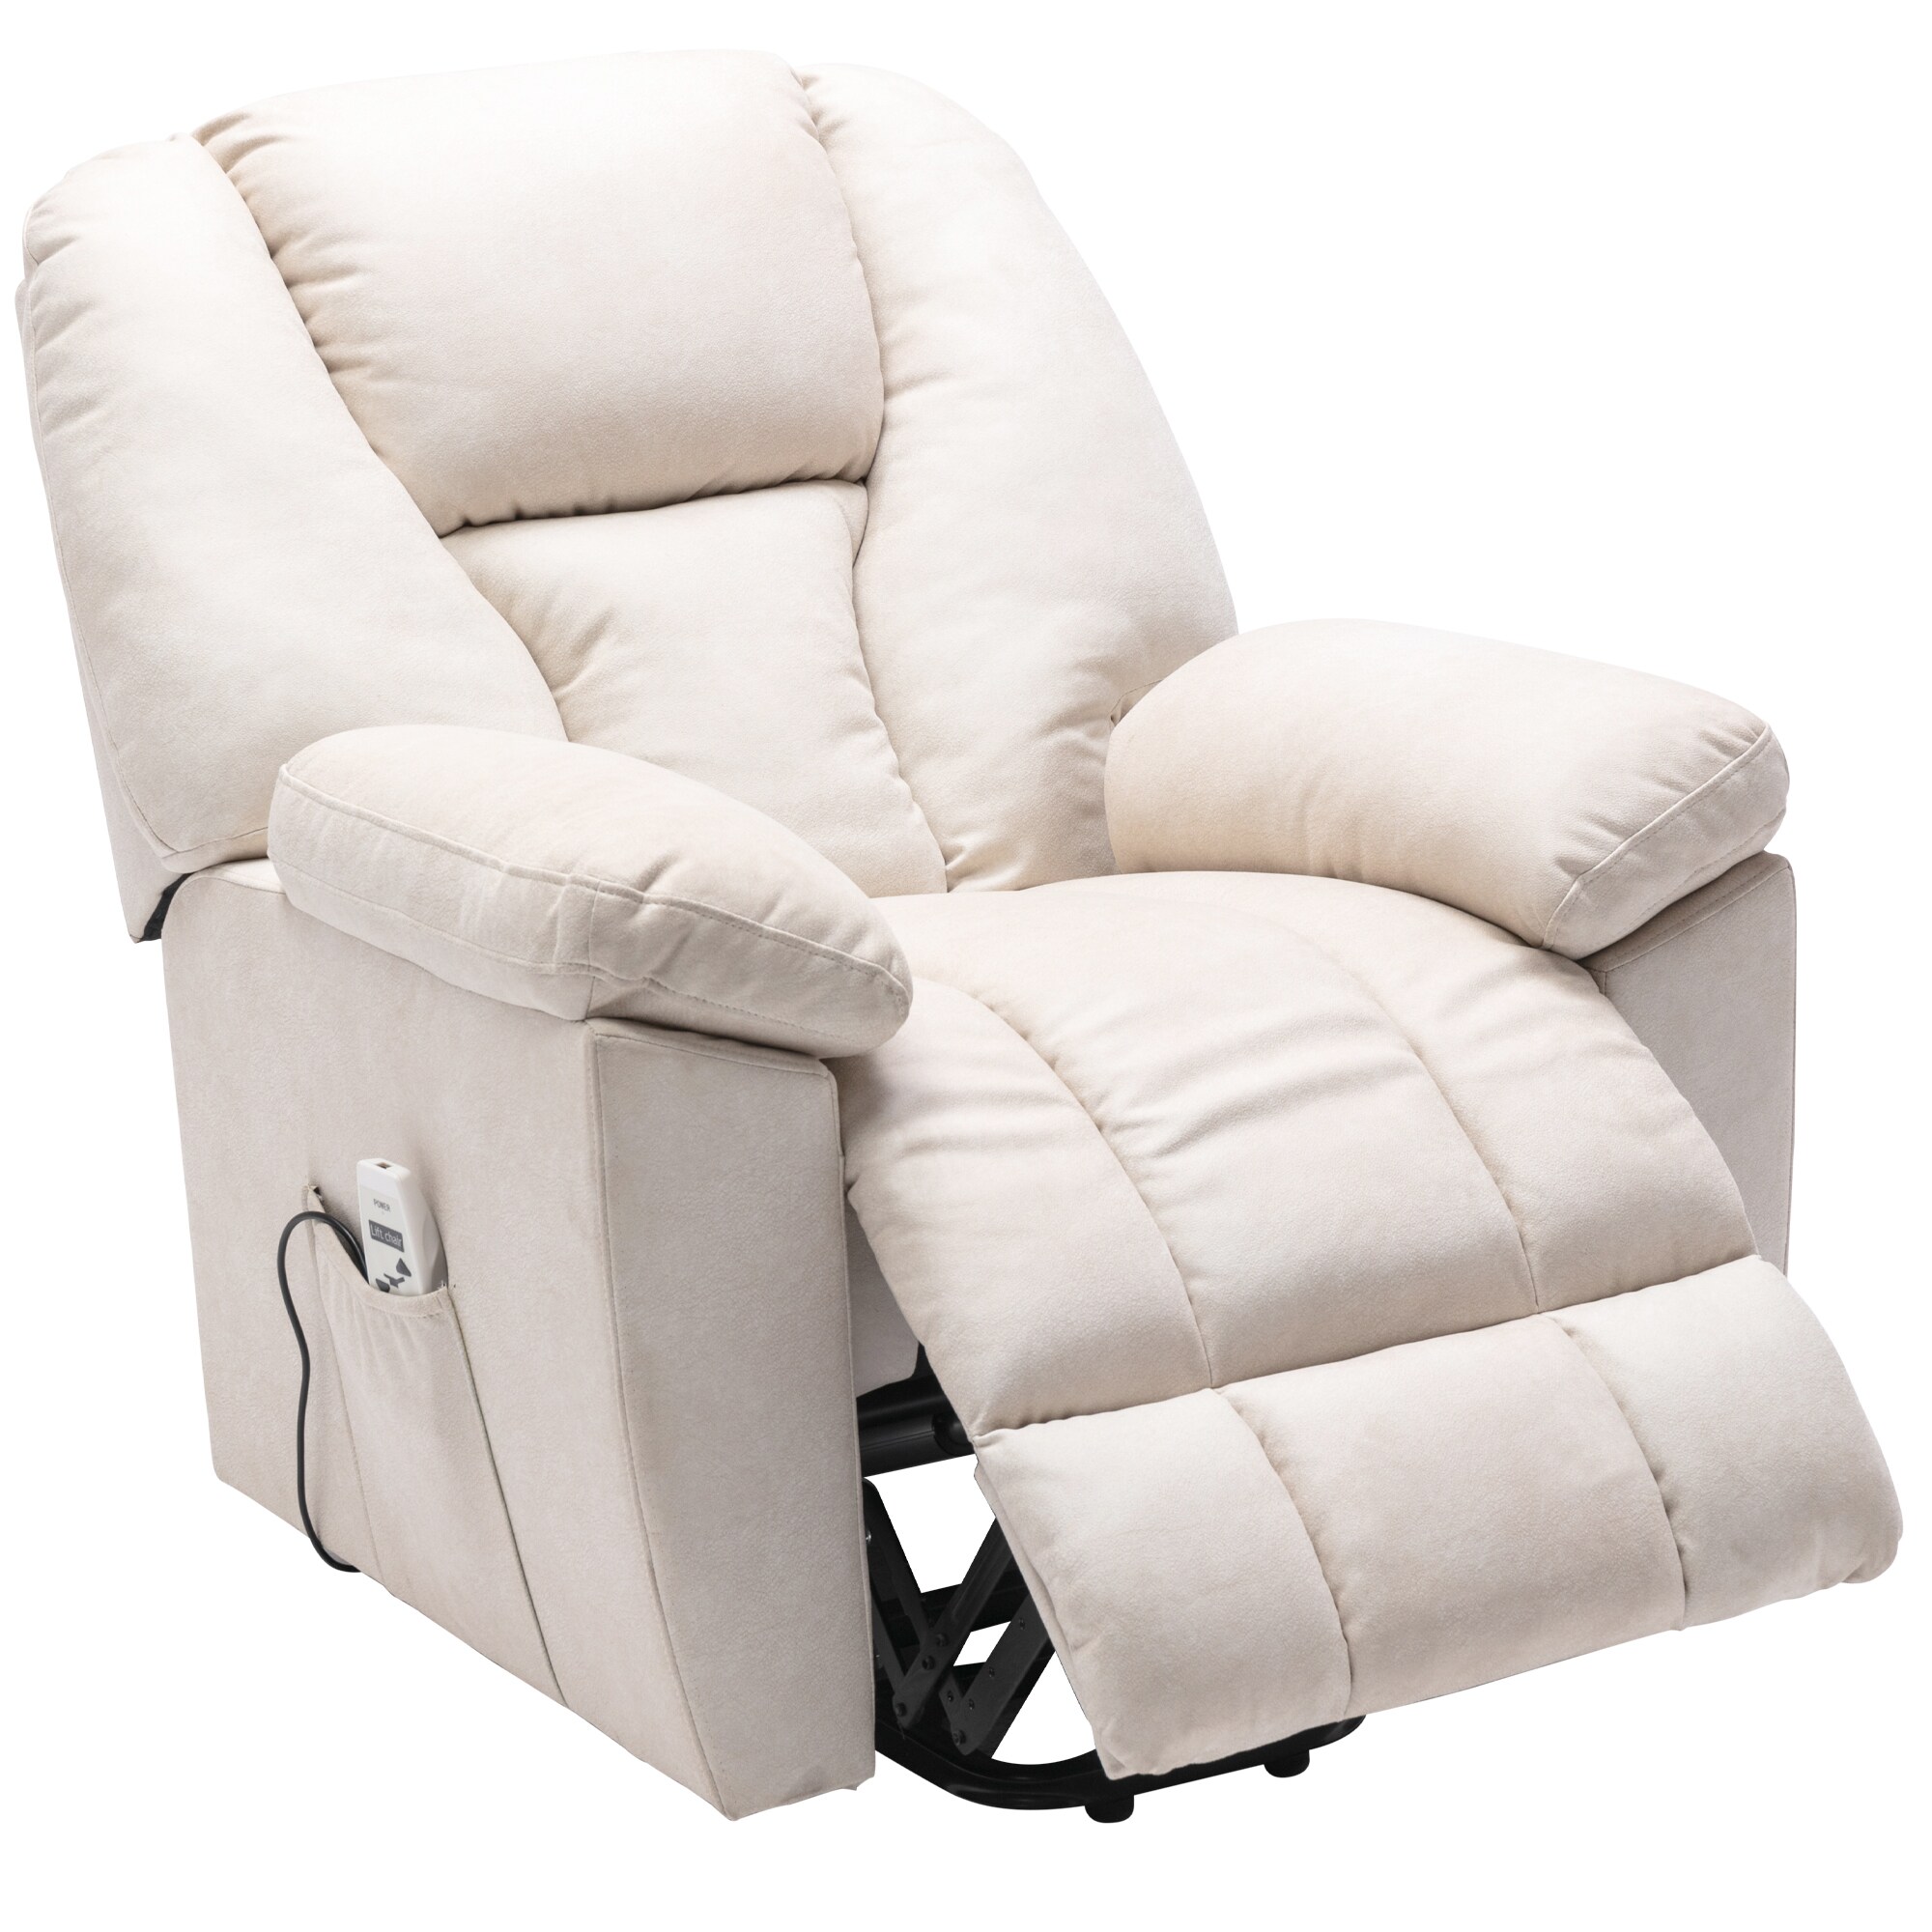 Beige Power Lift Recliner Recliners at Lowes.com